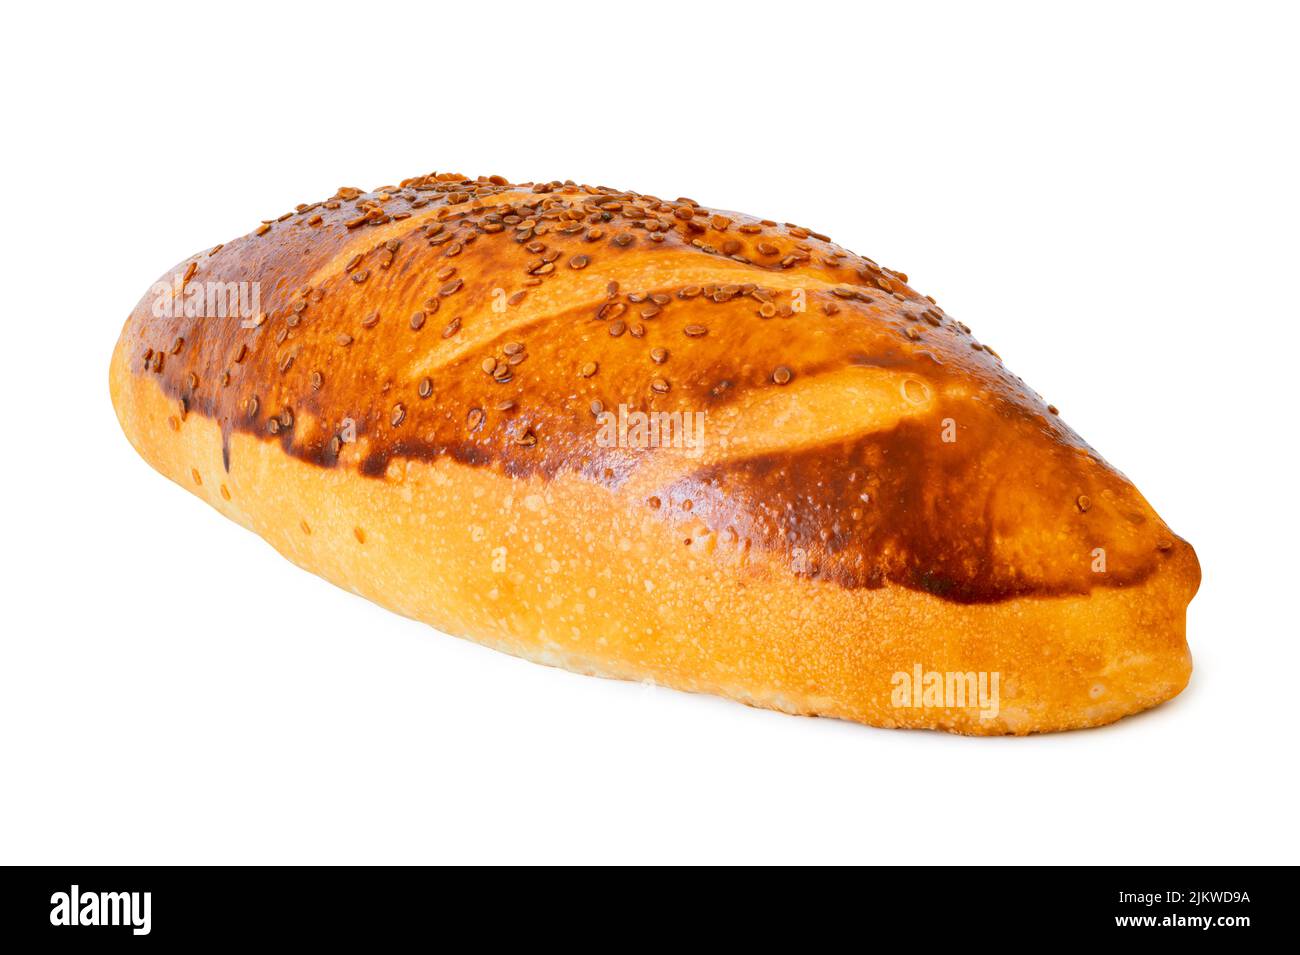 Isolated sweet pastry bun isolated on white background. With sesame seeds and grain Stock Photo